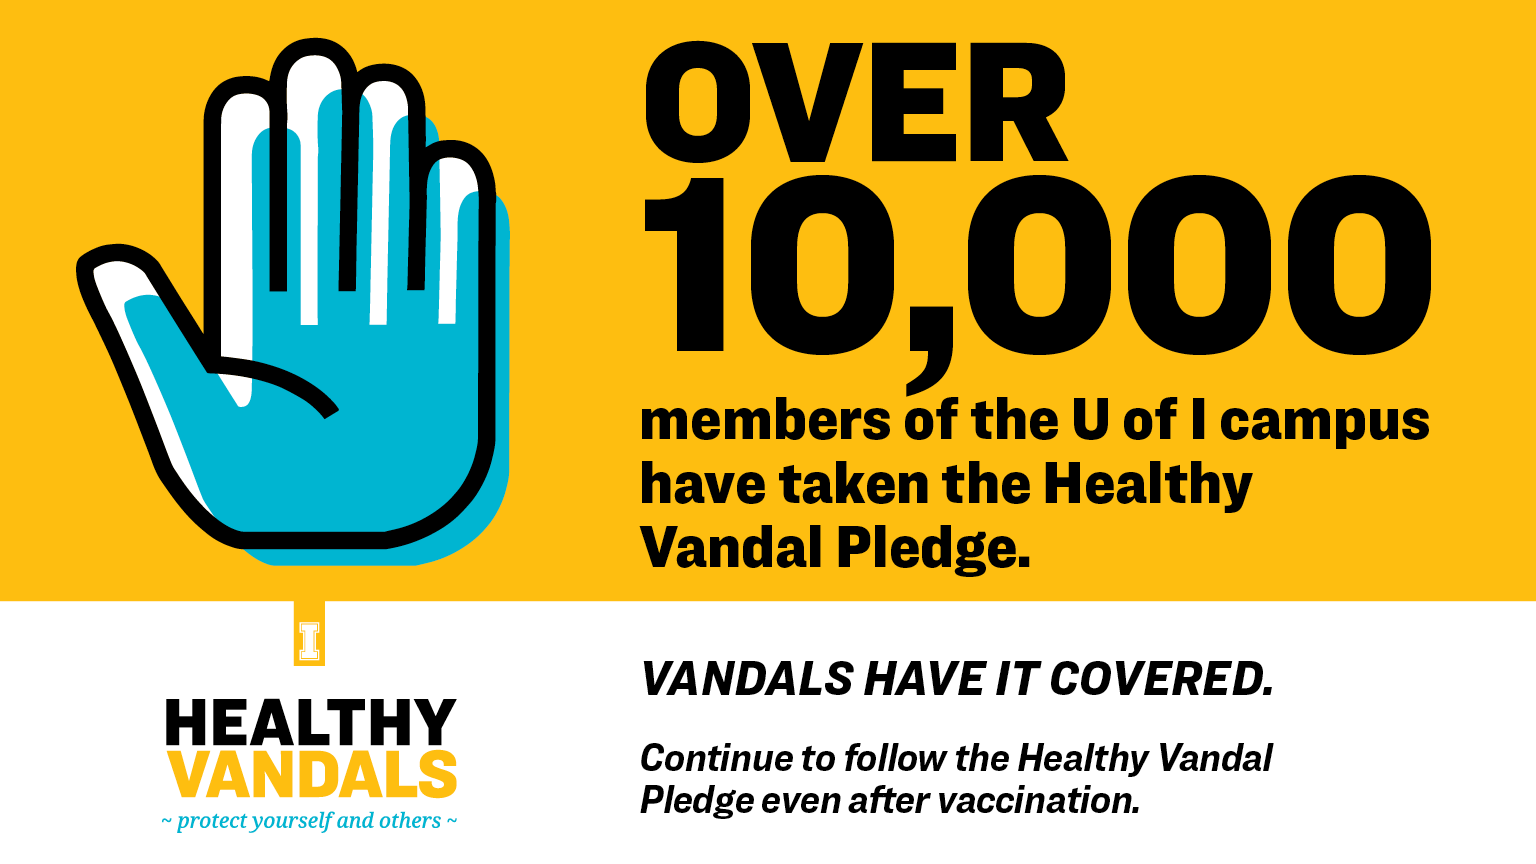 Over 10,000 members of the U of I campus have taken the Healthy Vandal Pledge. Vandals have it covered. Continue to follow the Healthy Vandal Pledge even after vaccination.